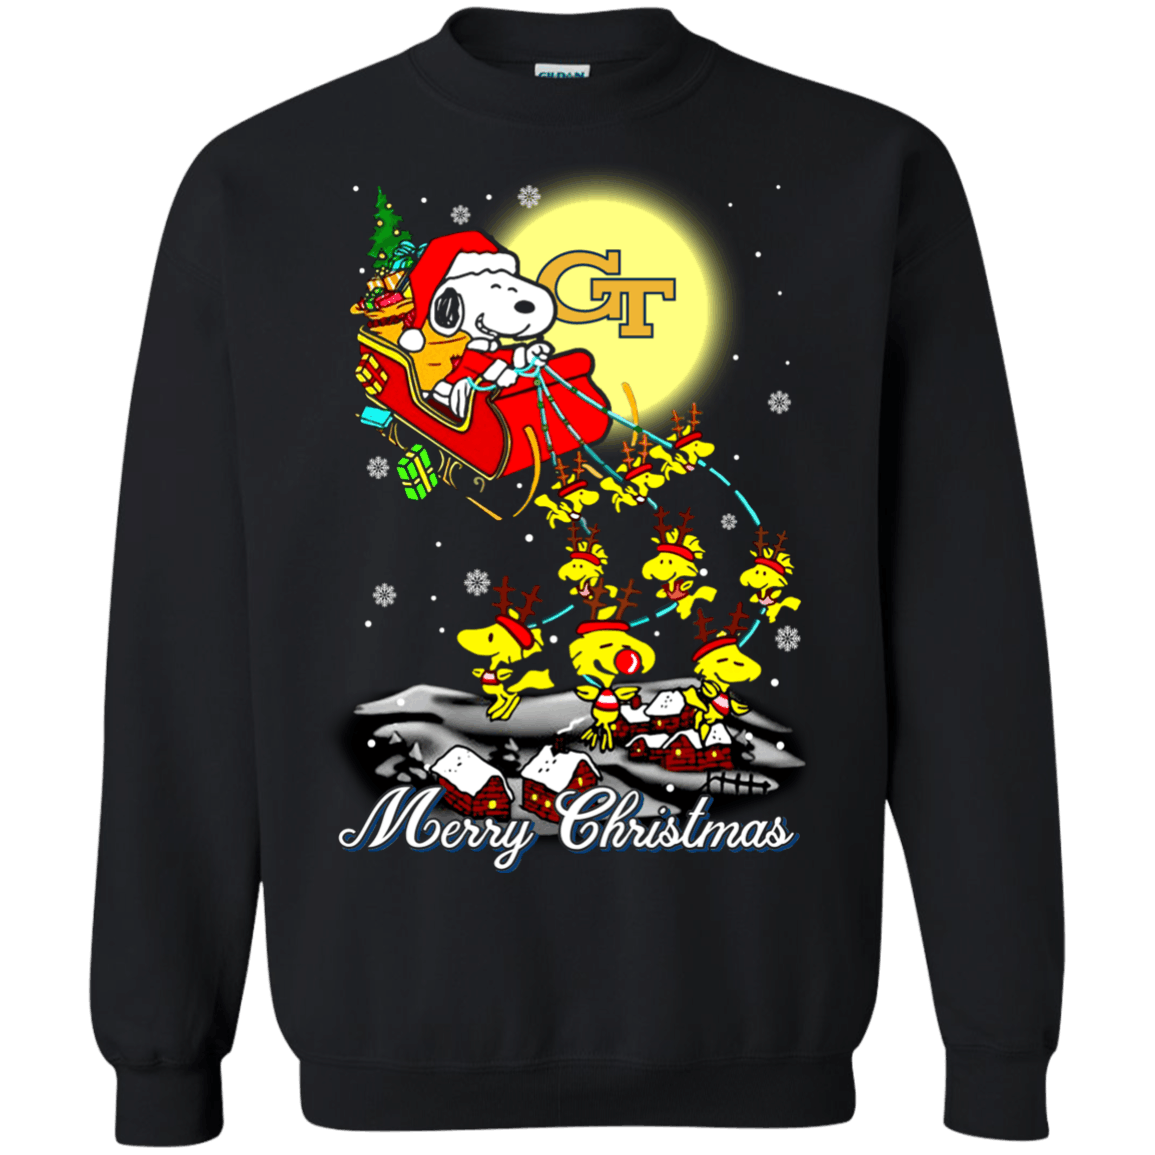 Blithesome Georgia Tech Yellow Jackets Snoopy Ugly Christmas Sweater 2023S Santa Claus With Sleigh Sweatshirts